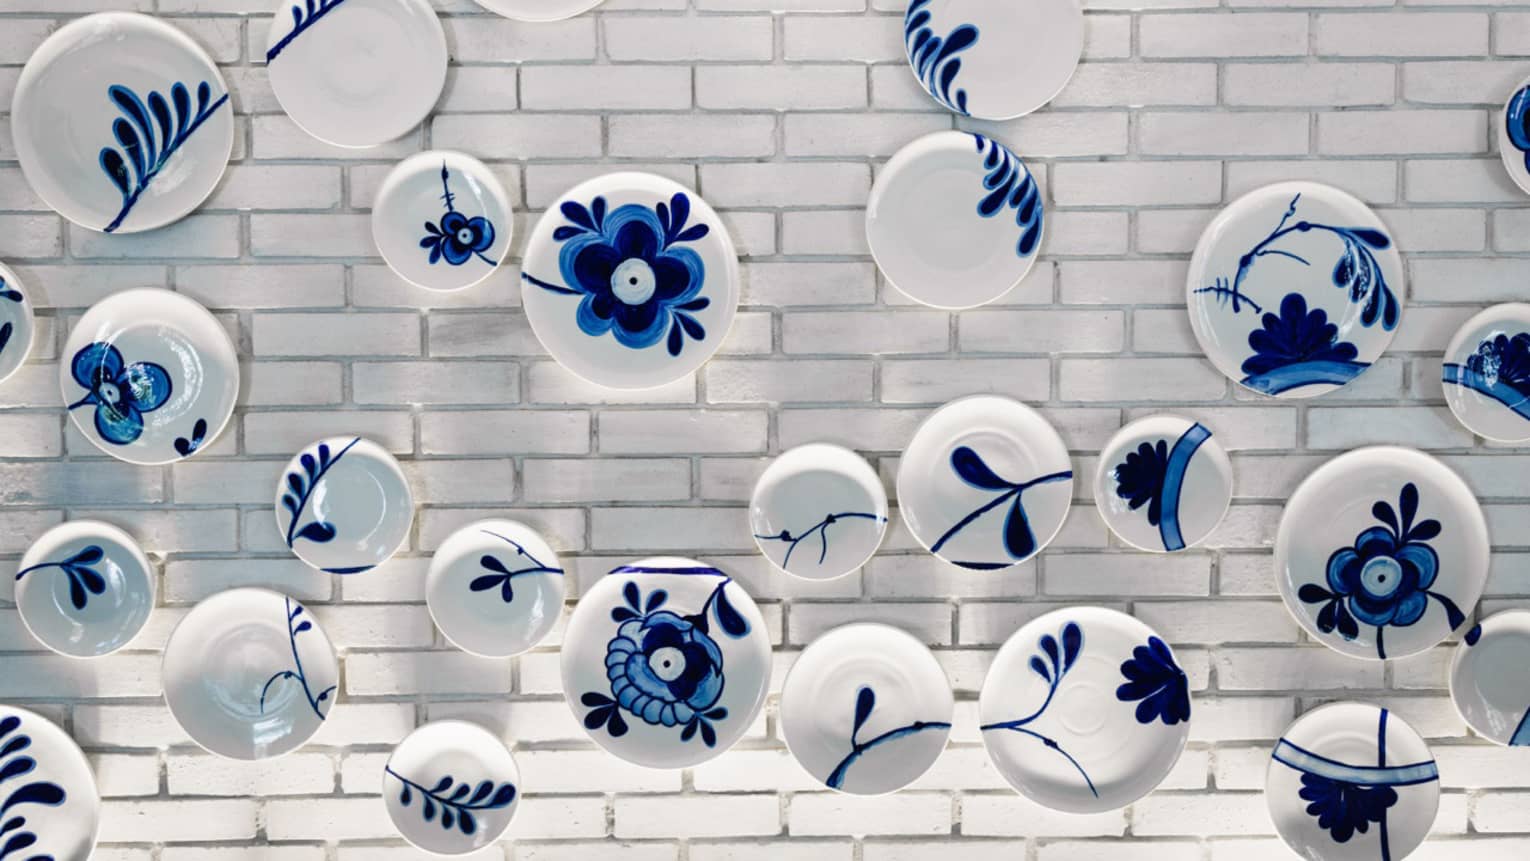 Wall art made up of various white plates painted with blue leaves and flowers hang on a white brick wall